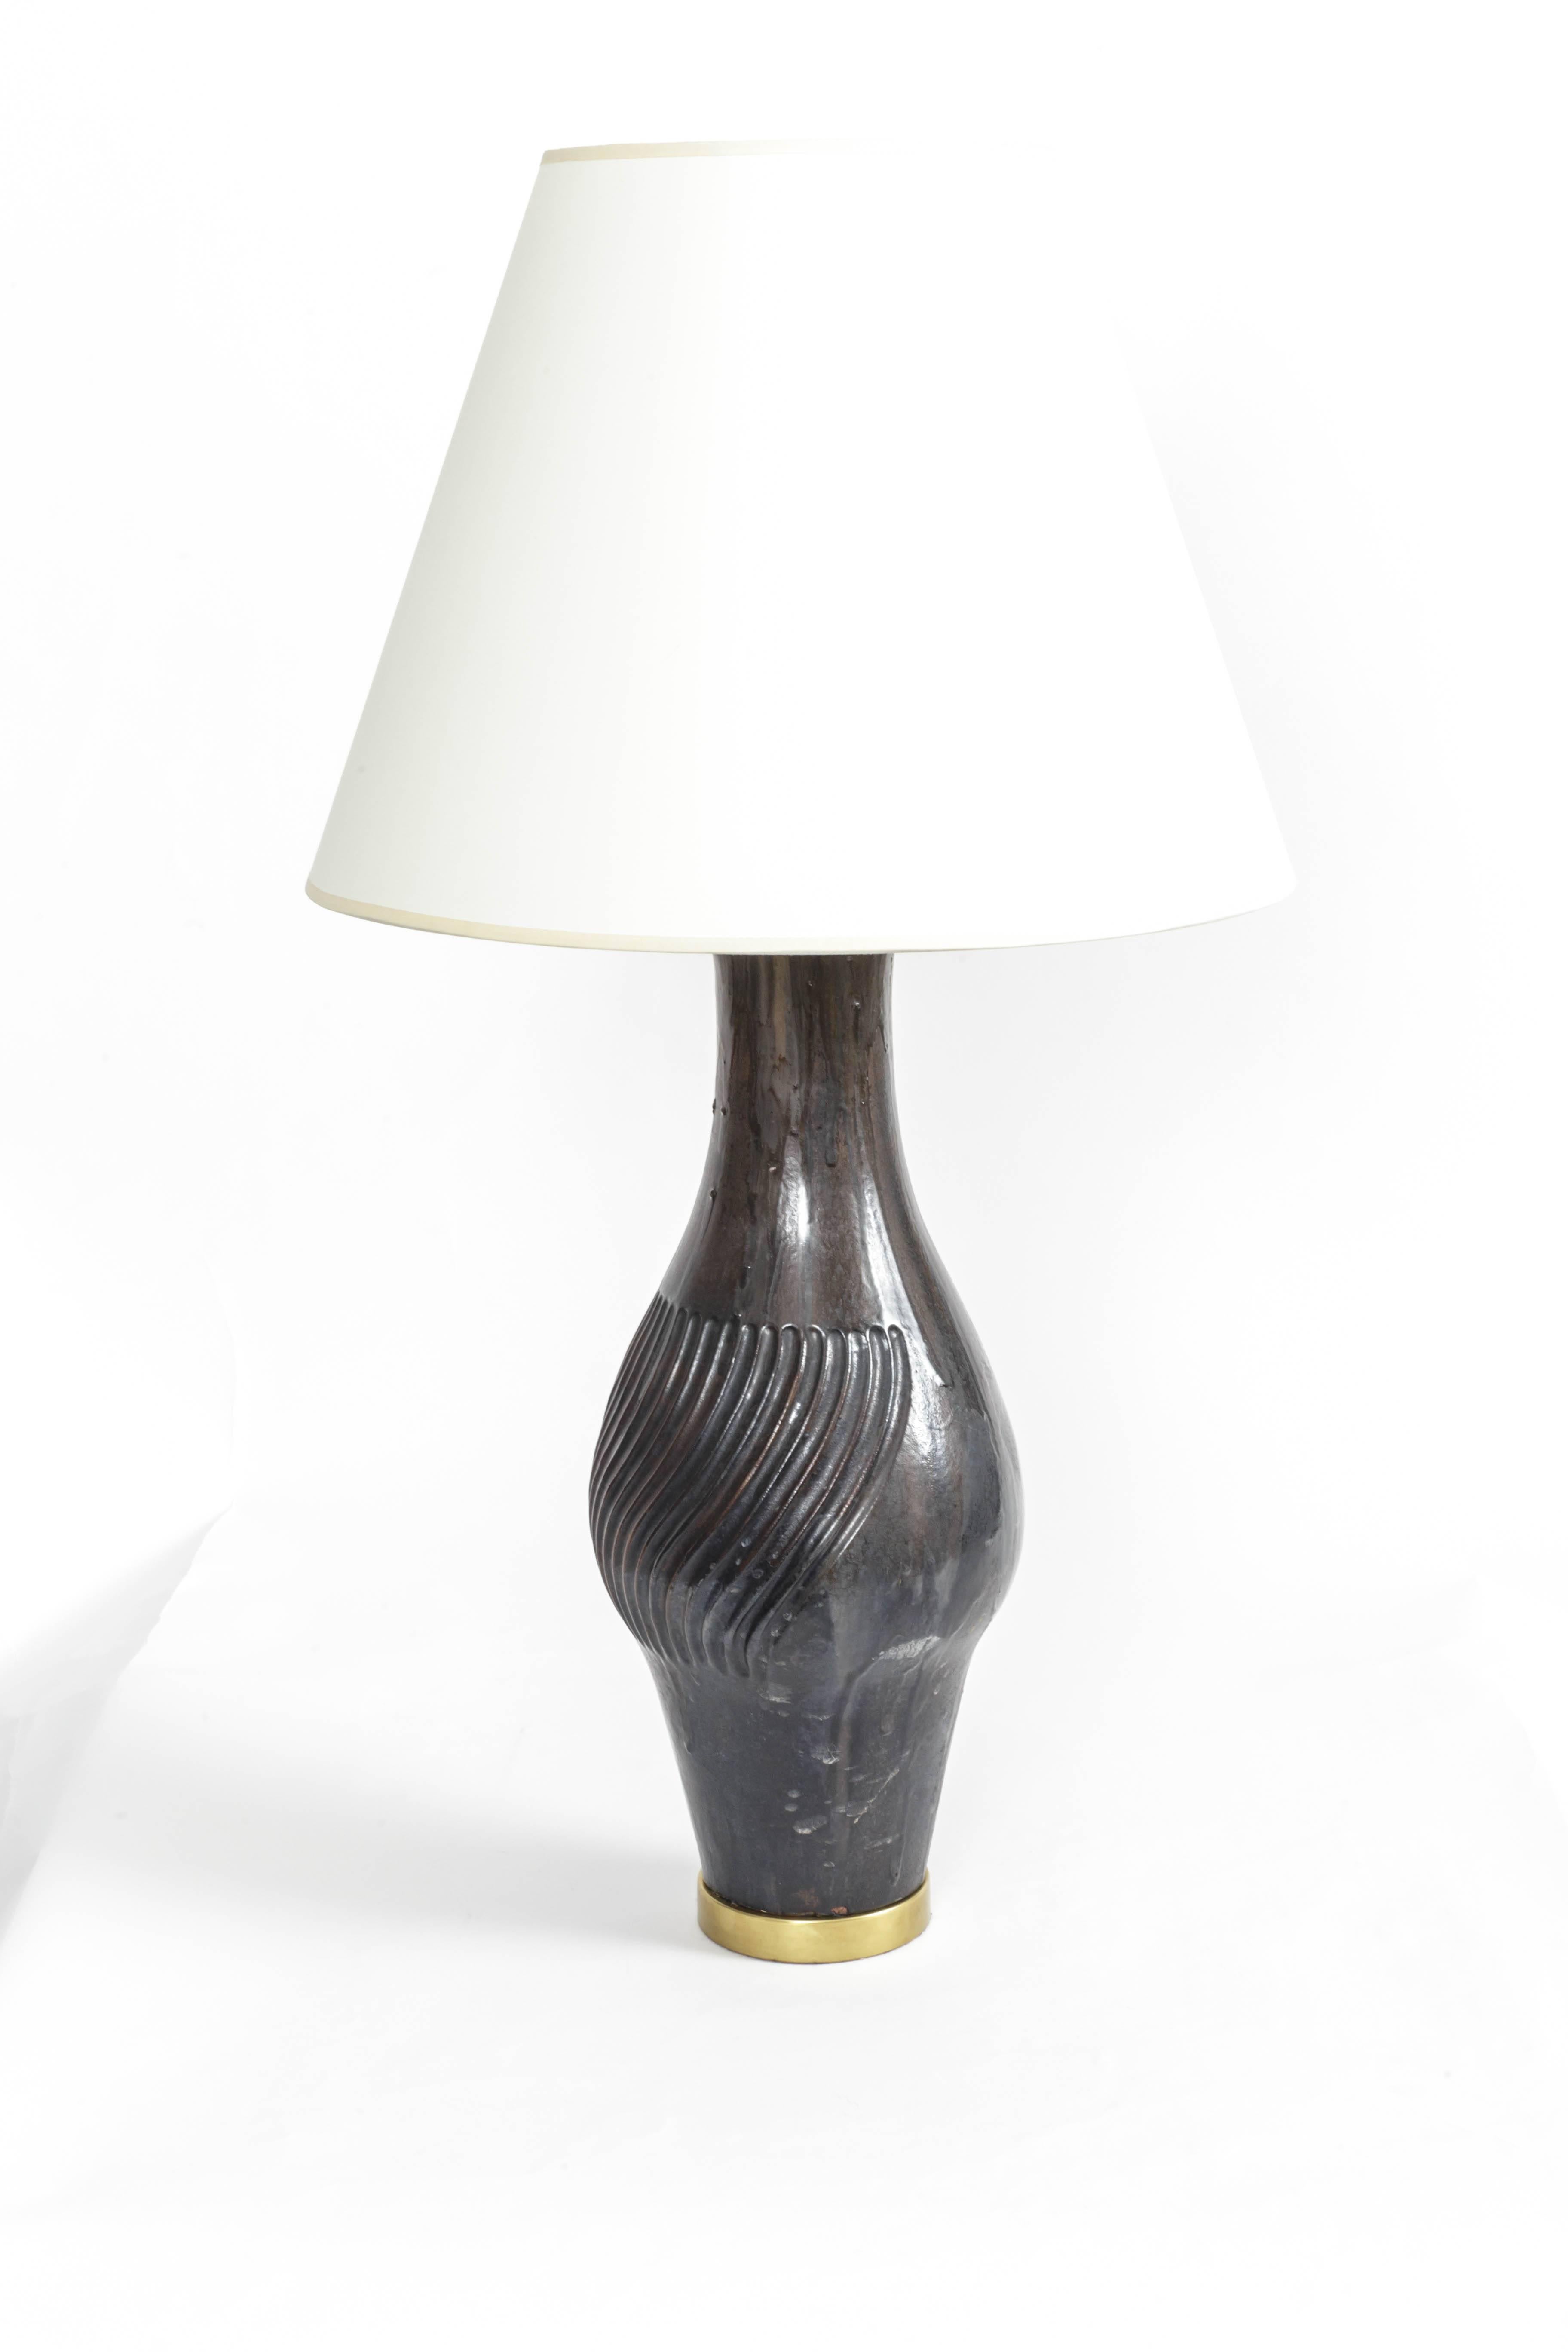 Italian Large Ceramic and Brass Table Lamp by Marcello Fantoni, Italy, 1958 For Sale